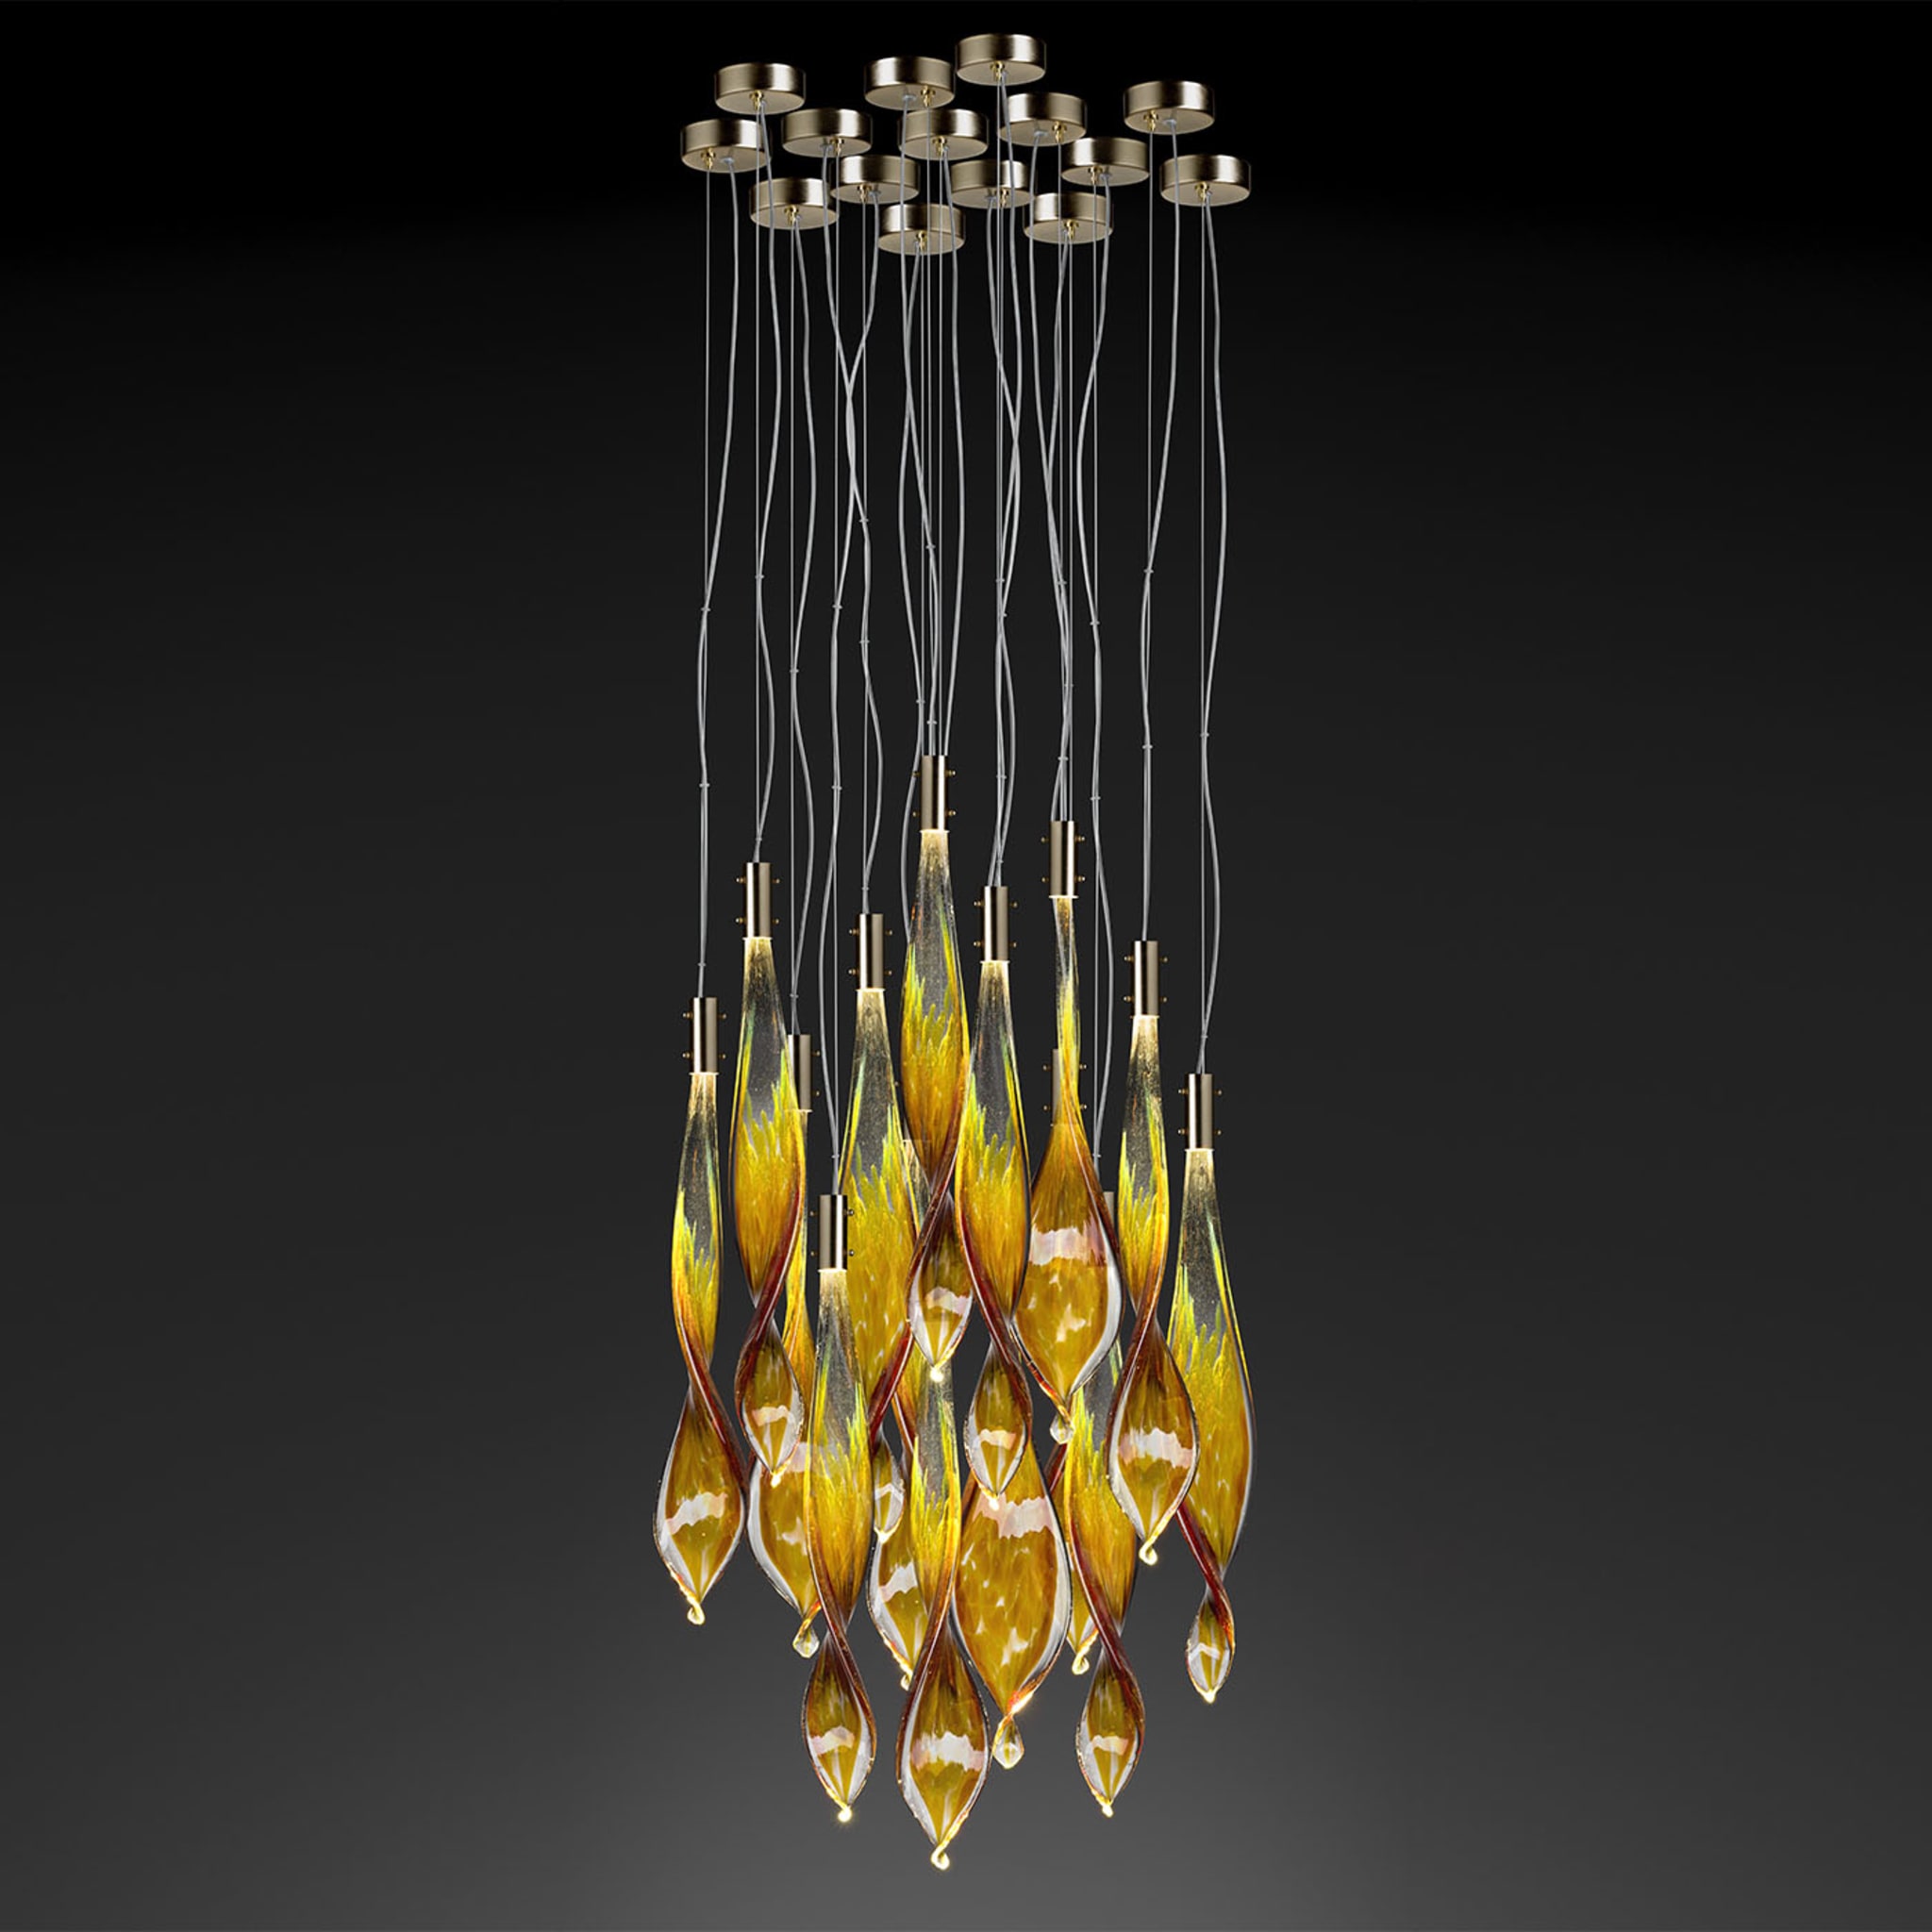 Glass Fall 14 Leaves Chandelier - Alternative view 1